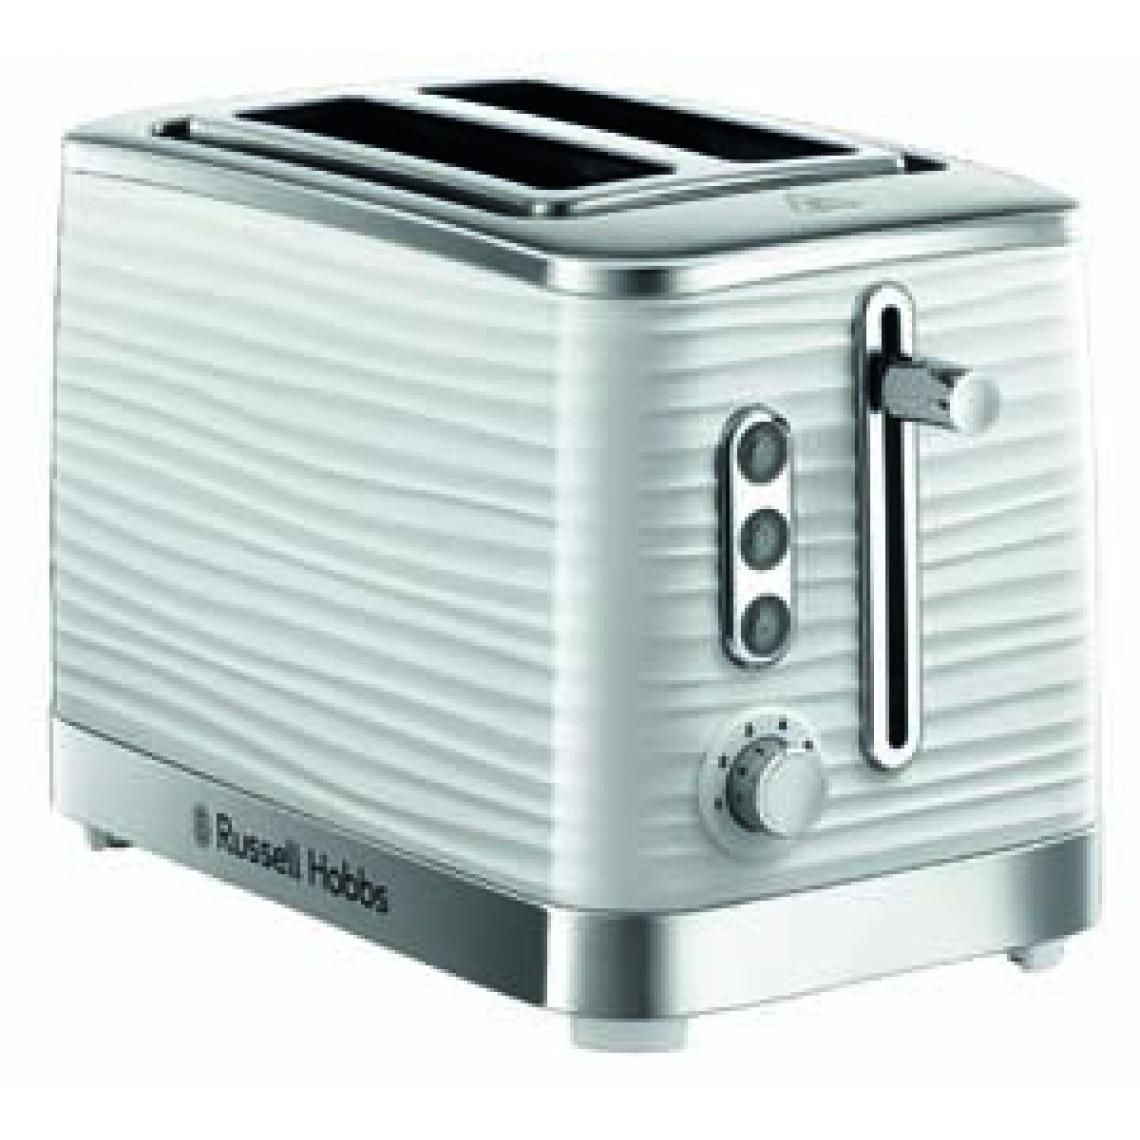 Russell Hobbs - Russell Hobbs 24370-56 Toaster Grille Pain XL Inspire, Contrôle Brunissage, Décongéle, Réchauffe, Chauffe Viennoiserie - Blanc - Grille-pain